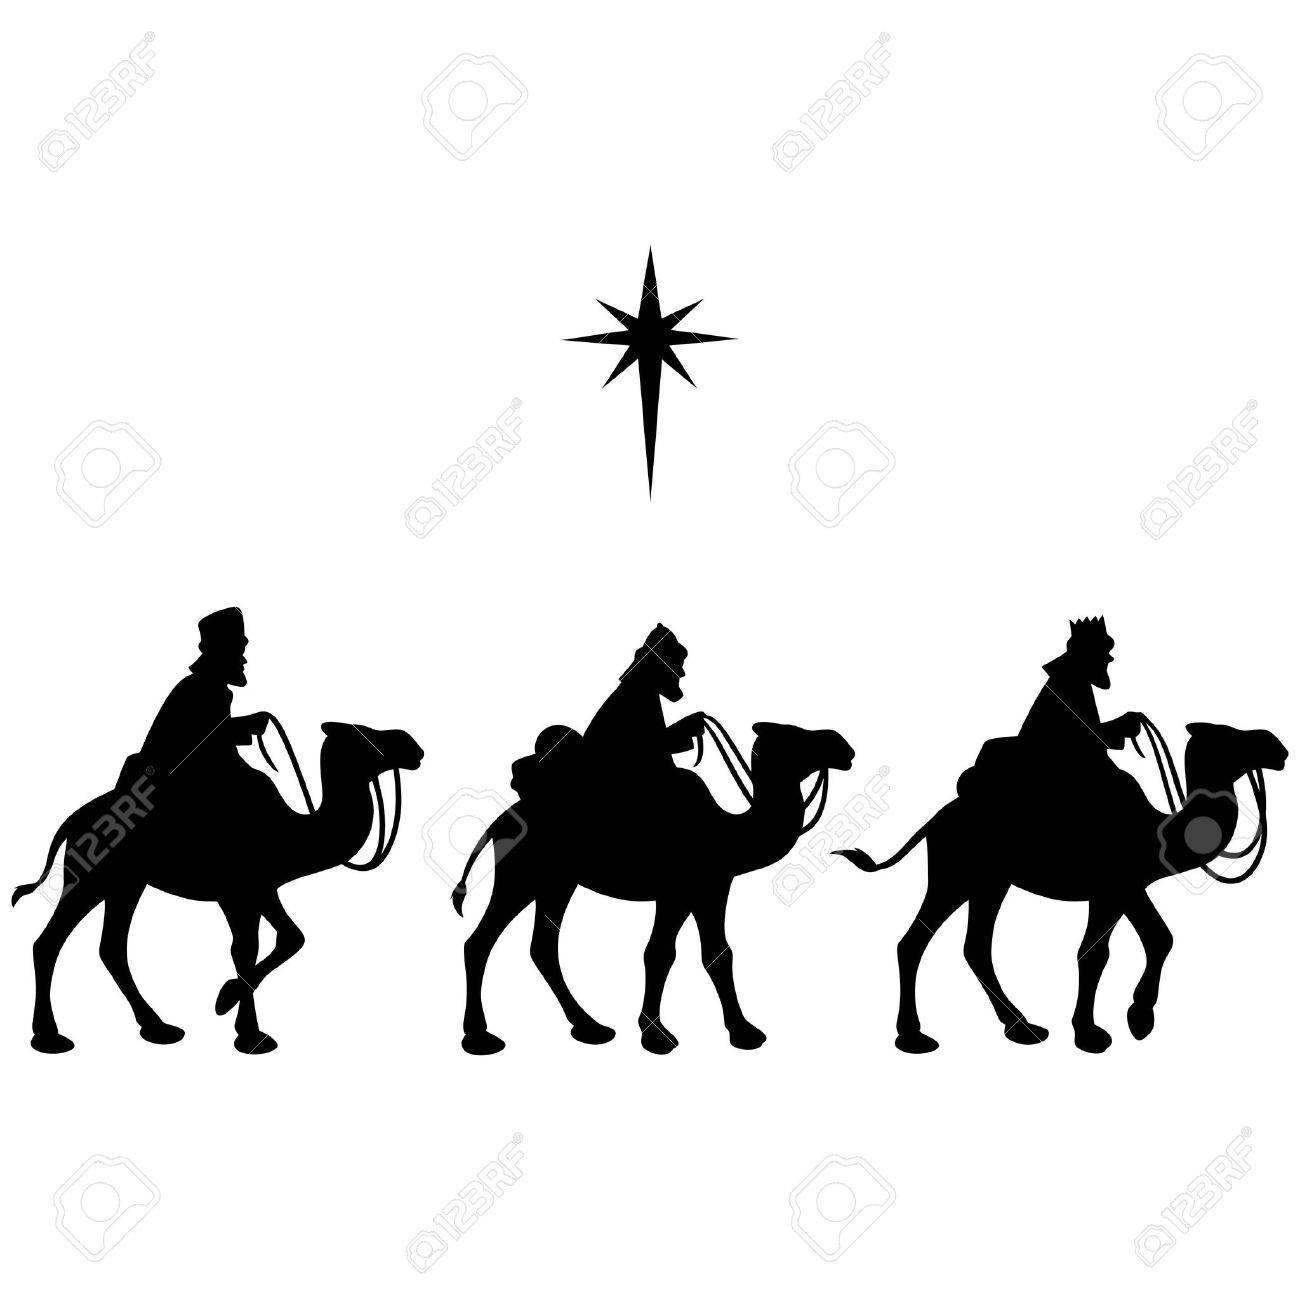 wise men clipart black and white 10 free Cliparts | Download images on